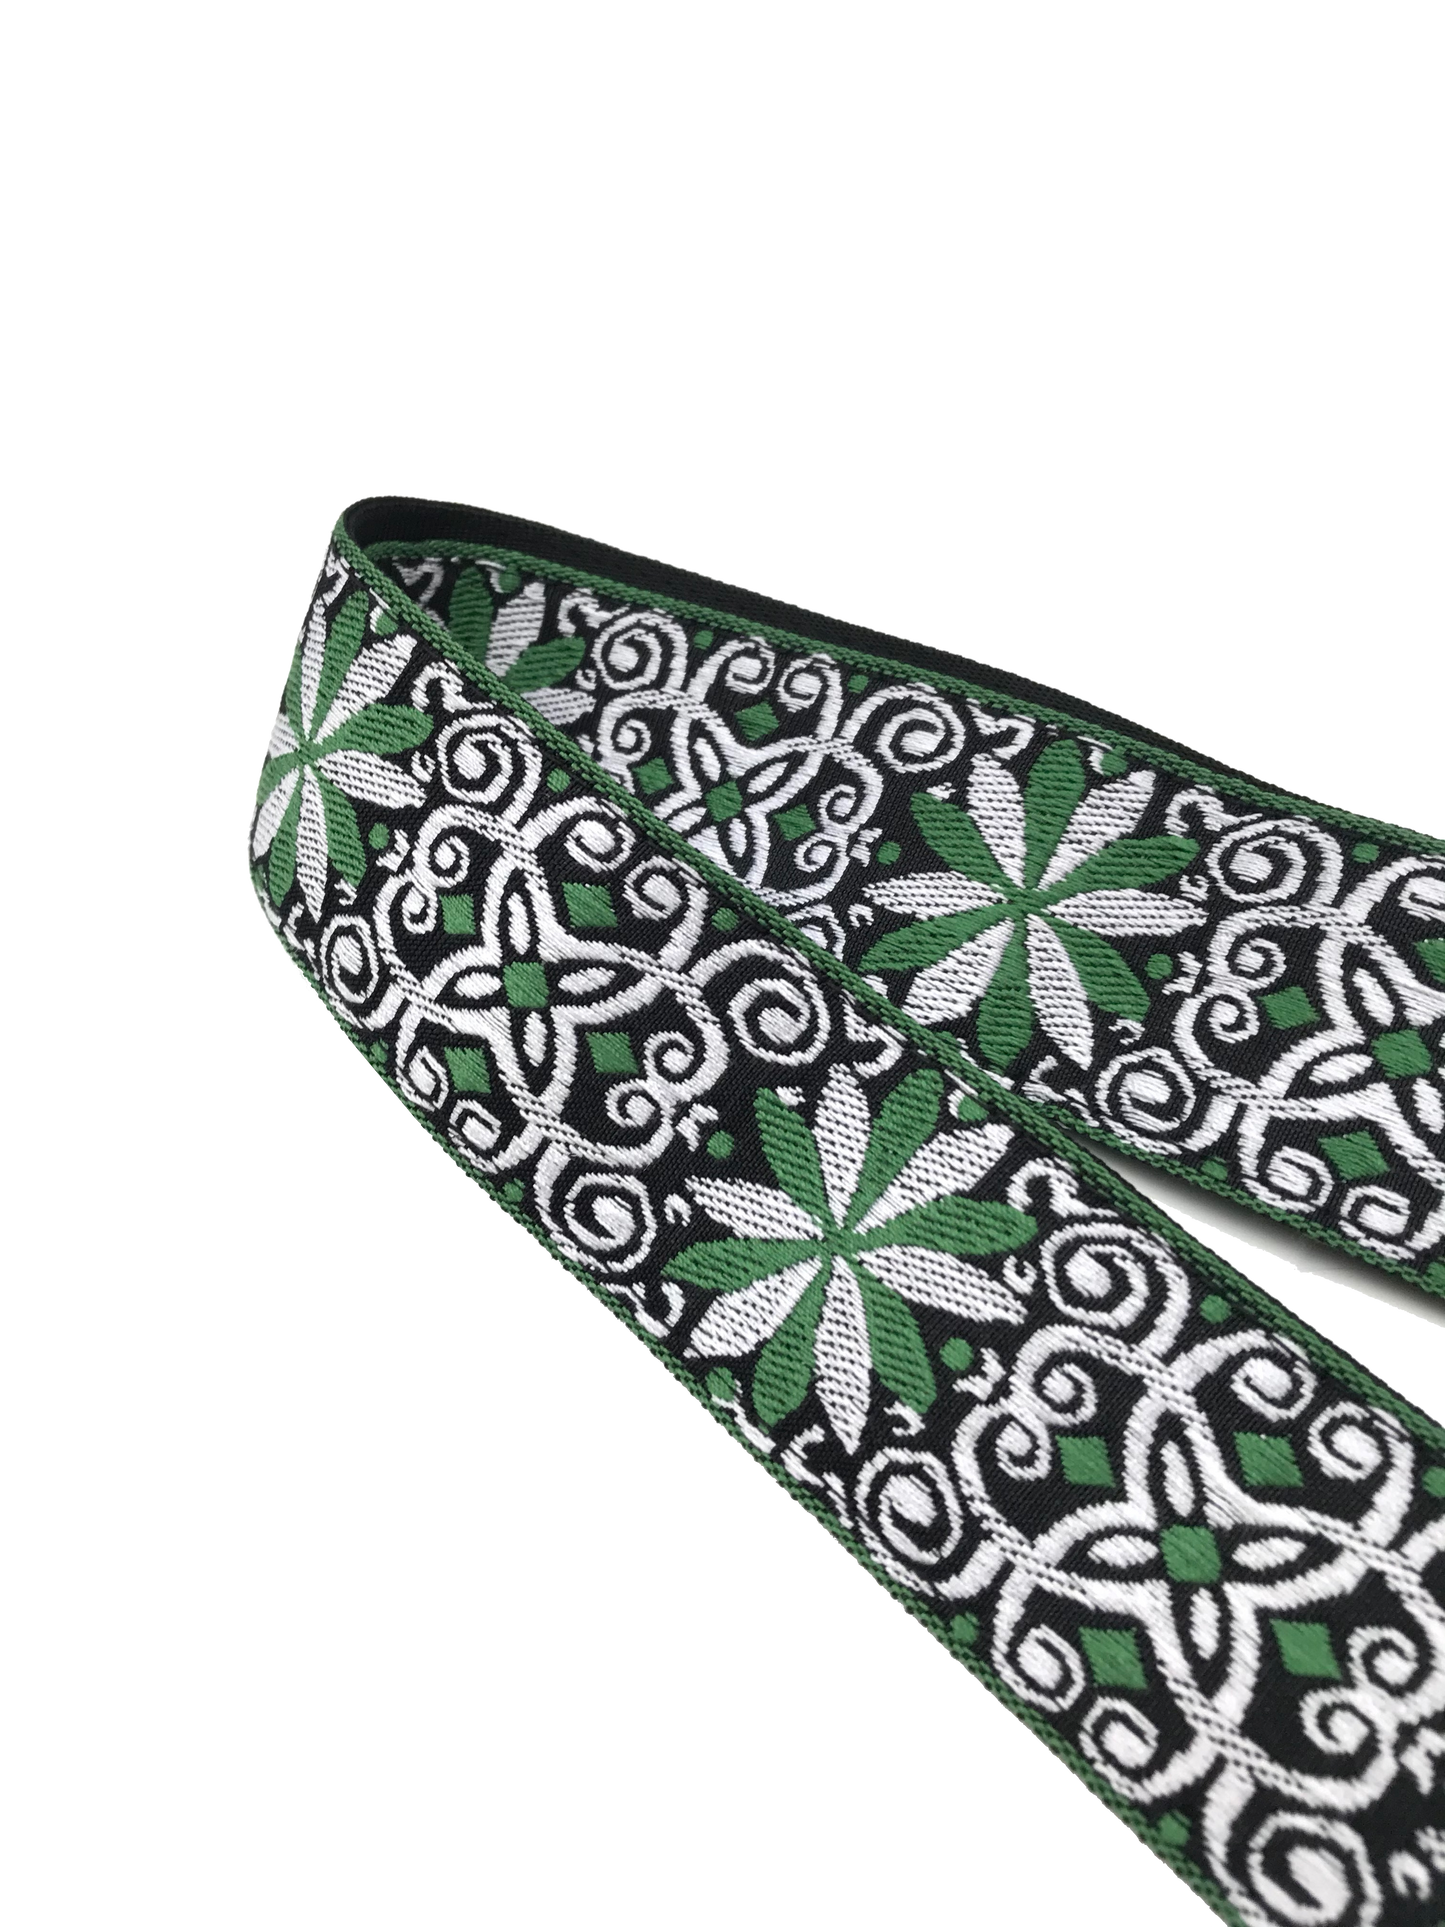 Kalena 2 Pin Acoustic Guitar Strap Buckle Style Embroidery Flower (jacquard band+nylon+real leather) - Kalena Instruments / Green